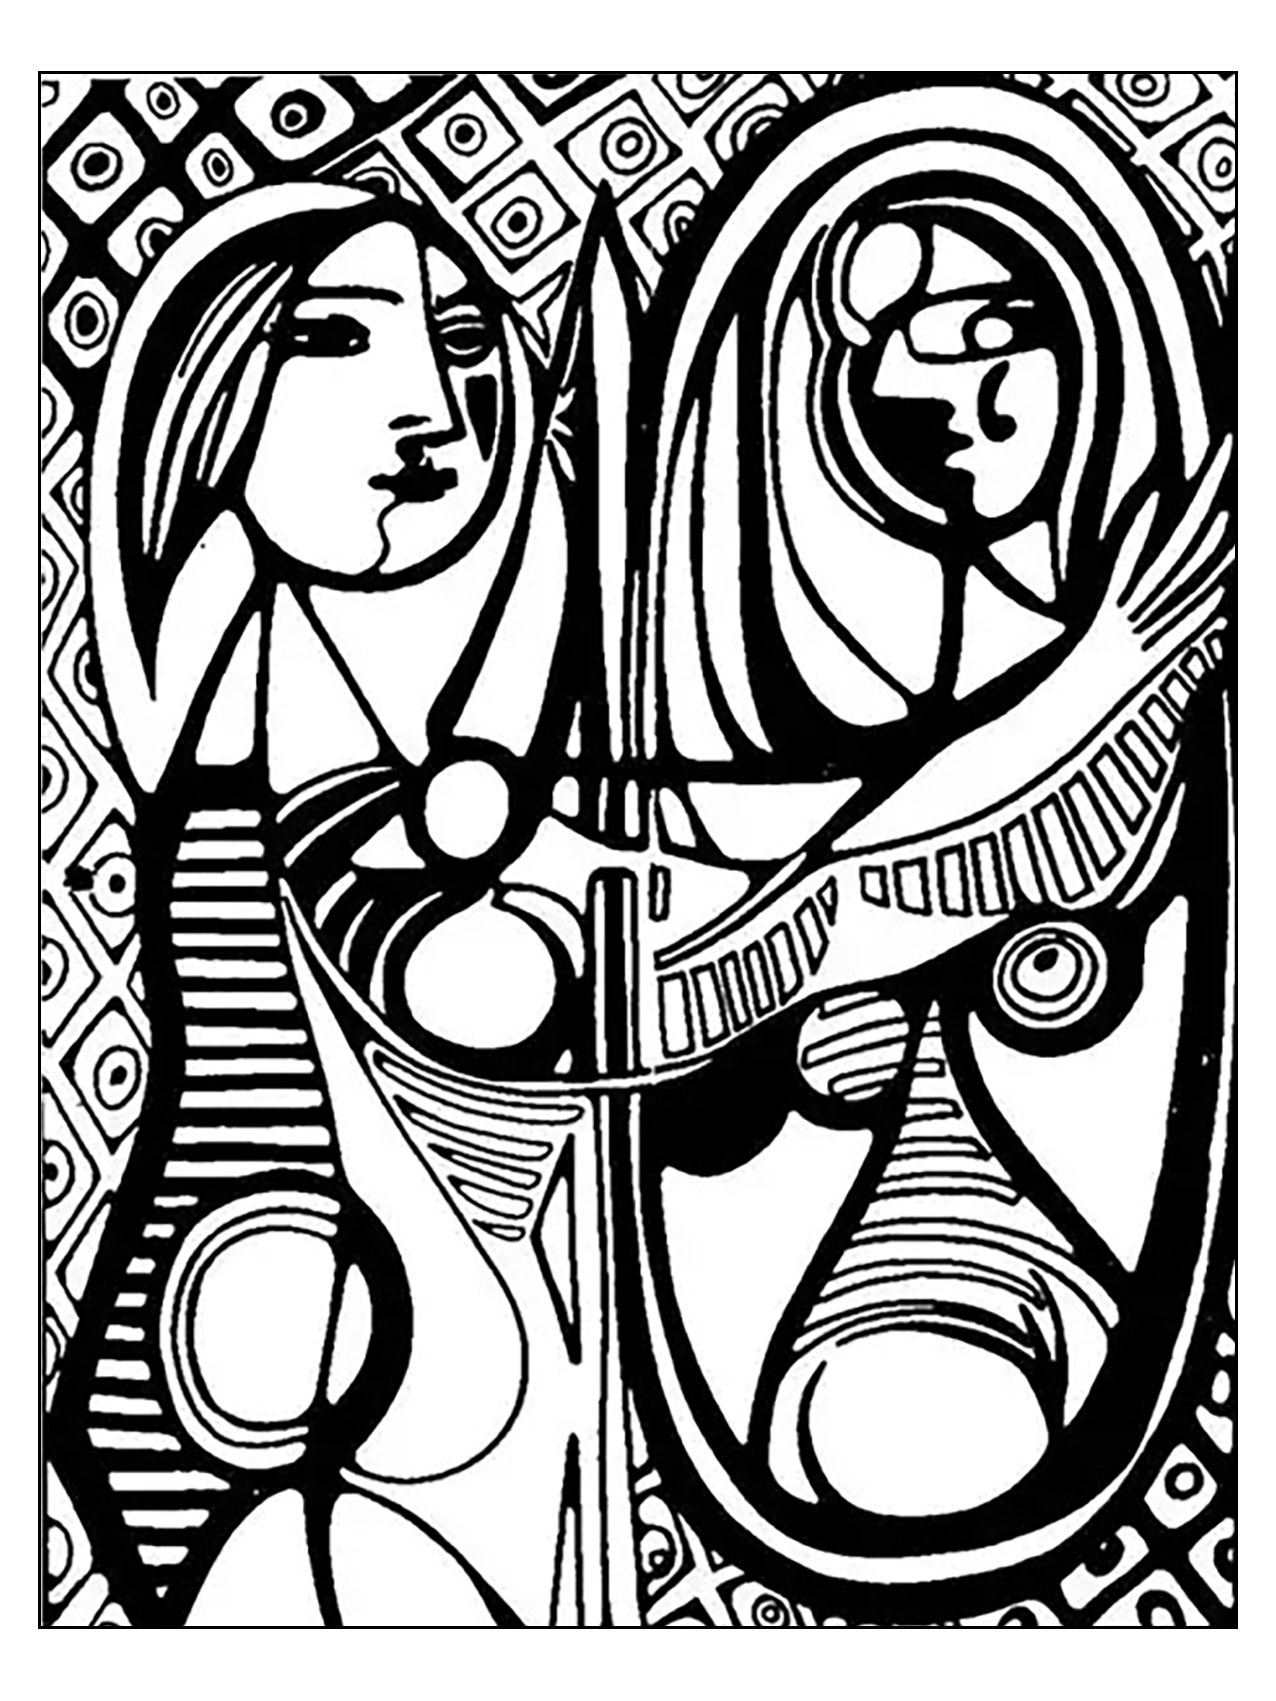 Picasso girl before a mirror 1932 - Masterpieces Adult Coloring Pages